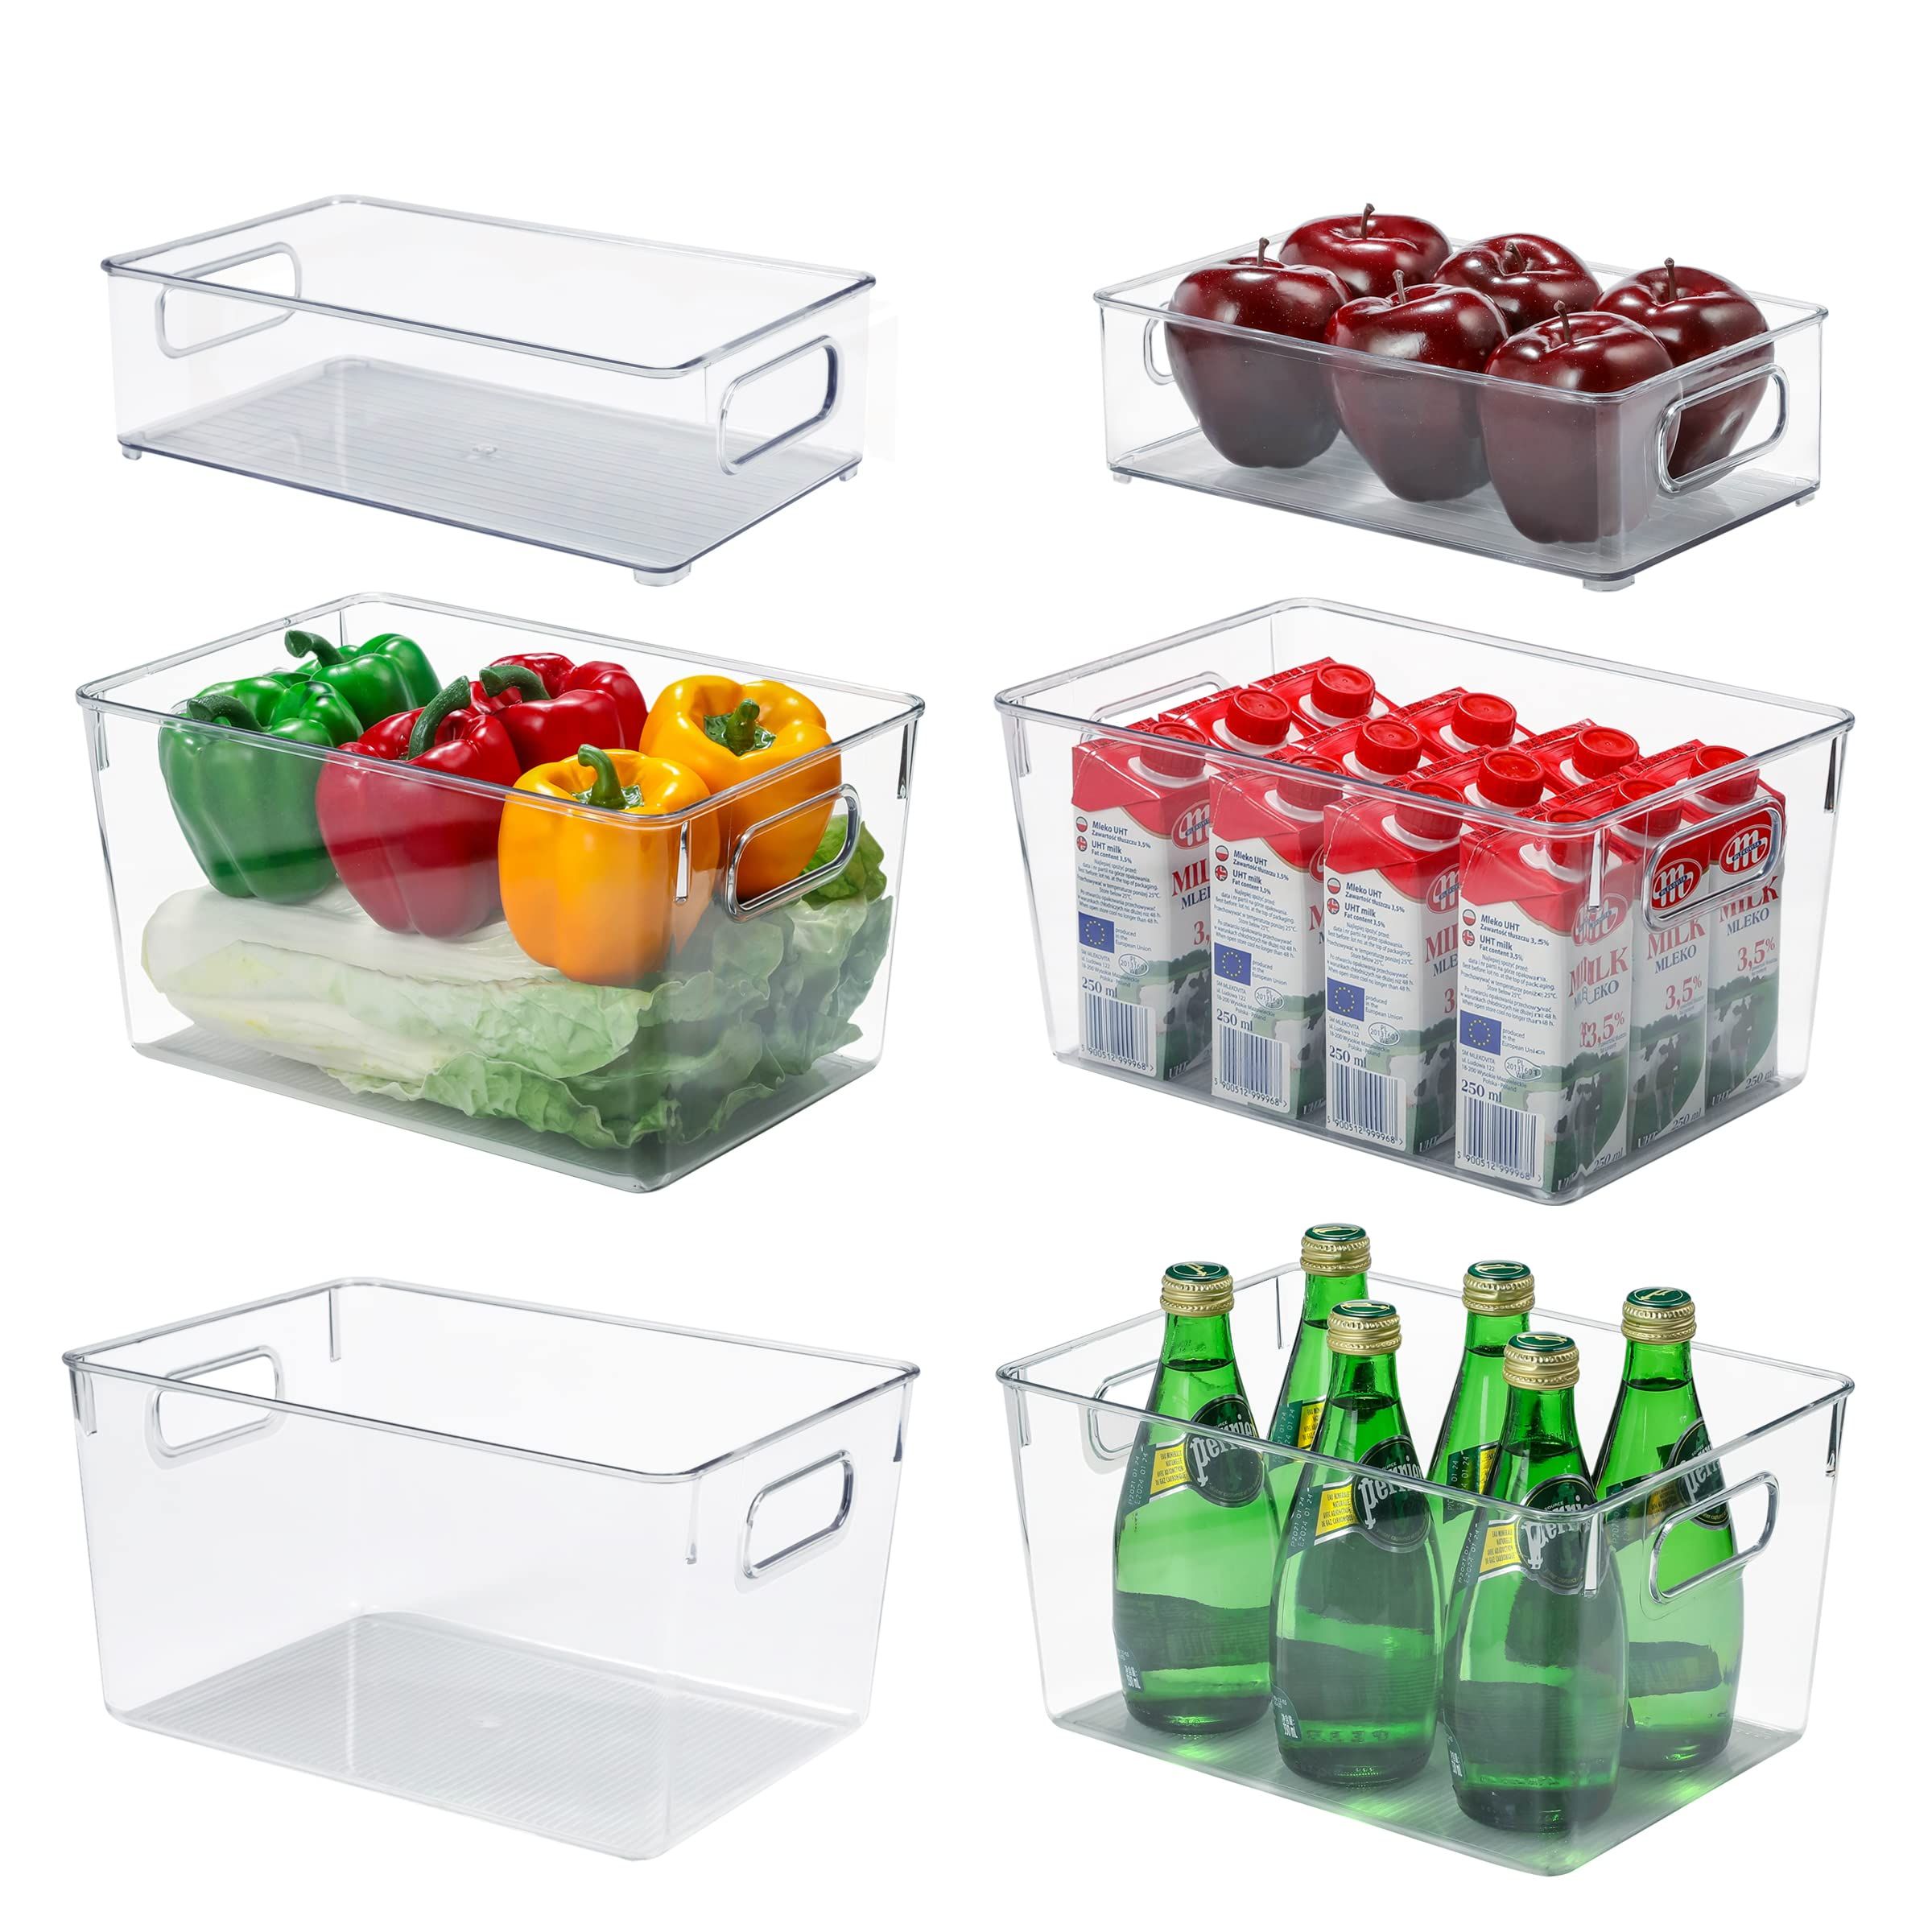 Set of 6 Refrigerator Organizers Bins - Clear Plastic Storage Bins Pantry Bins with Handles, for Fre | Amazon (US)